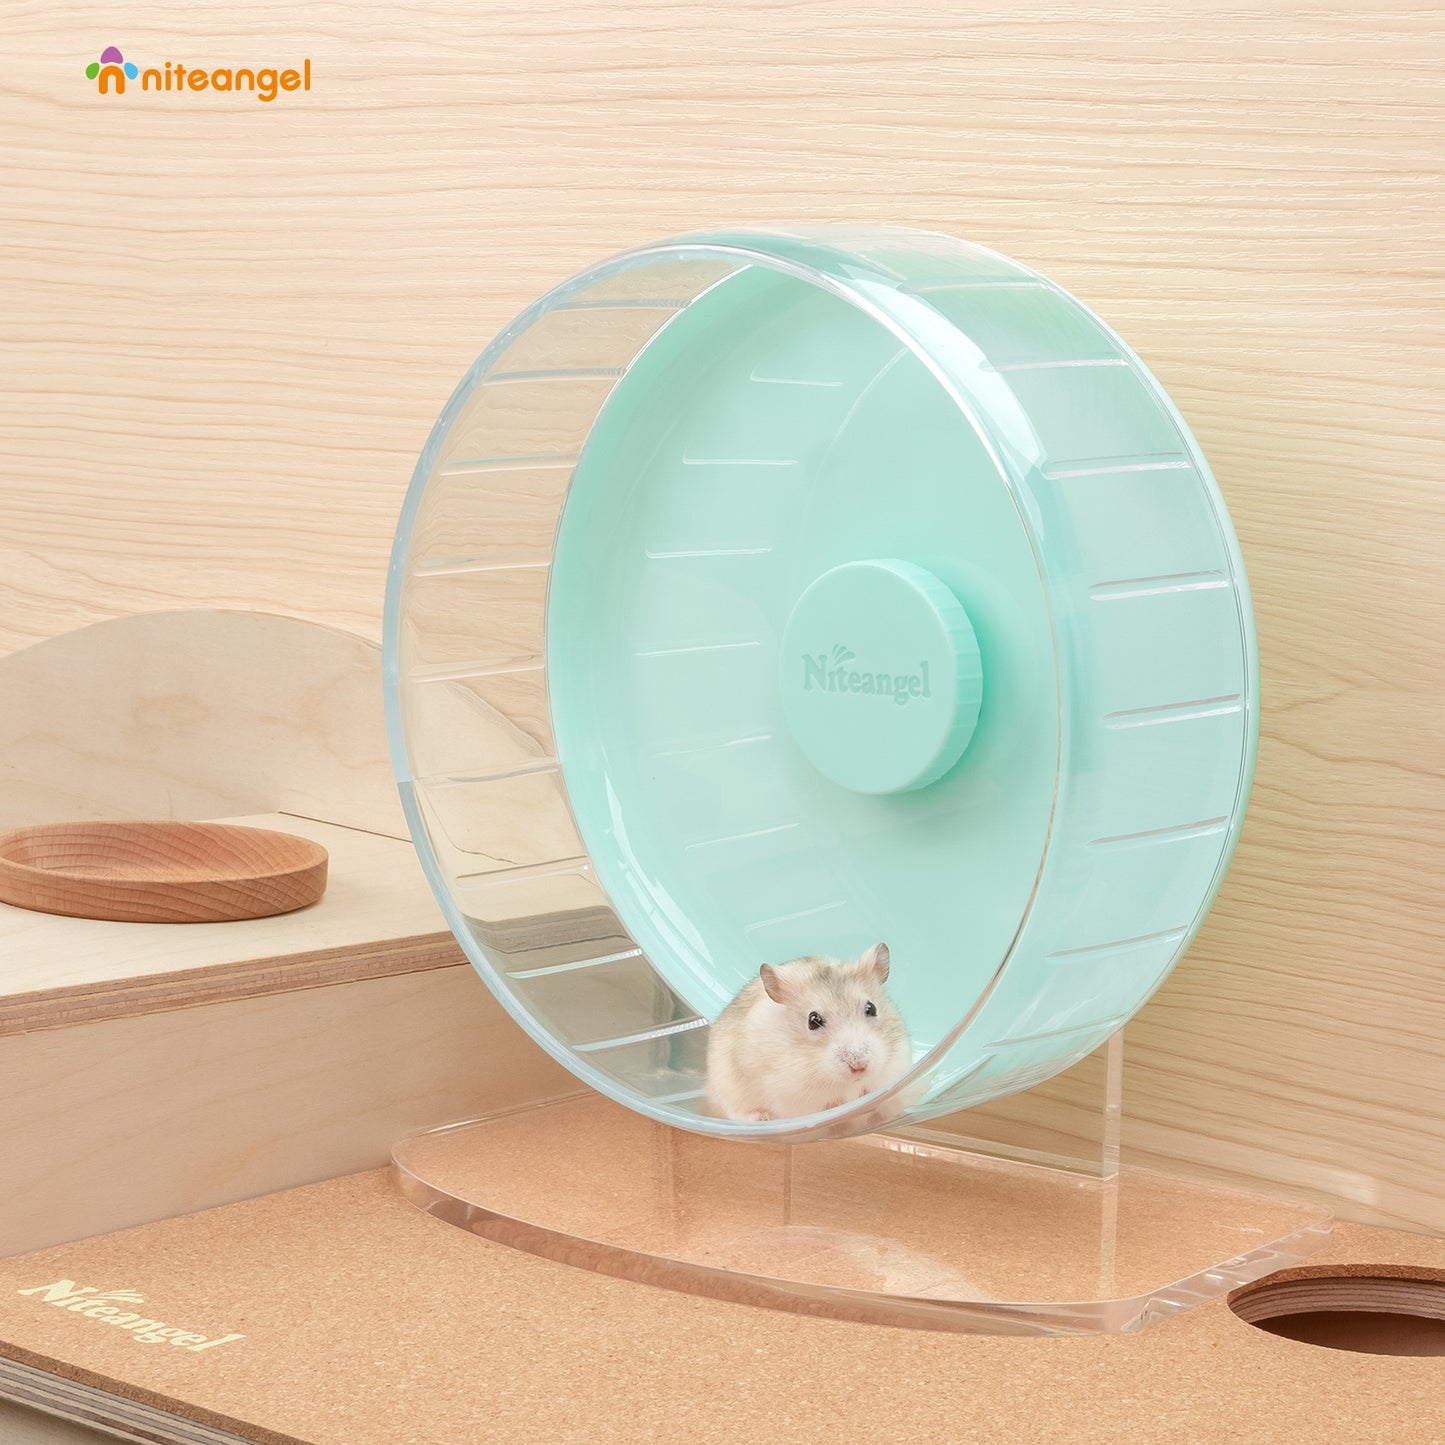 Niteangel Super-Silent Hamster Exercise Wheels: - Quiet Spinner Hamster Running Wheels with Adjustable Stand for Hamsters Gerbils Mice Or Other Small Animals